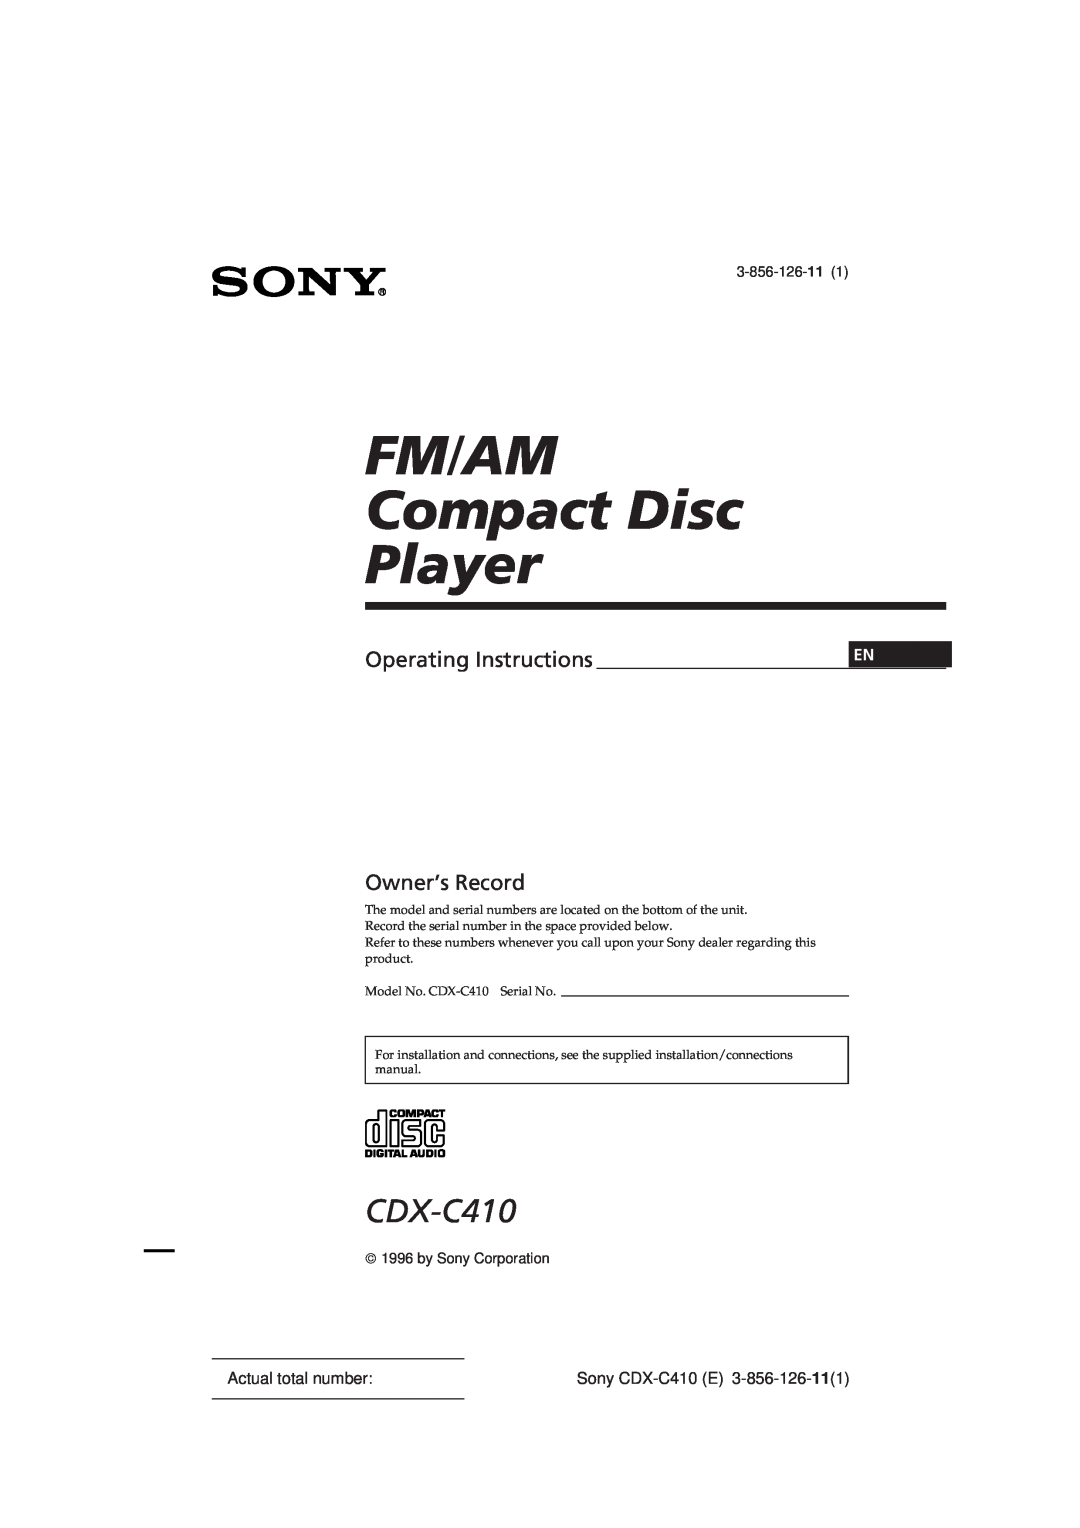 Sony CDX-C410 manual FM/AM Compact Disc Player, Operating Instructions, Owner’s Record, Actual total number, 3-856-126-11 